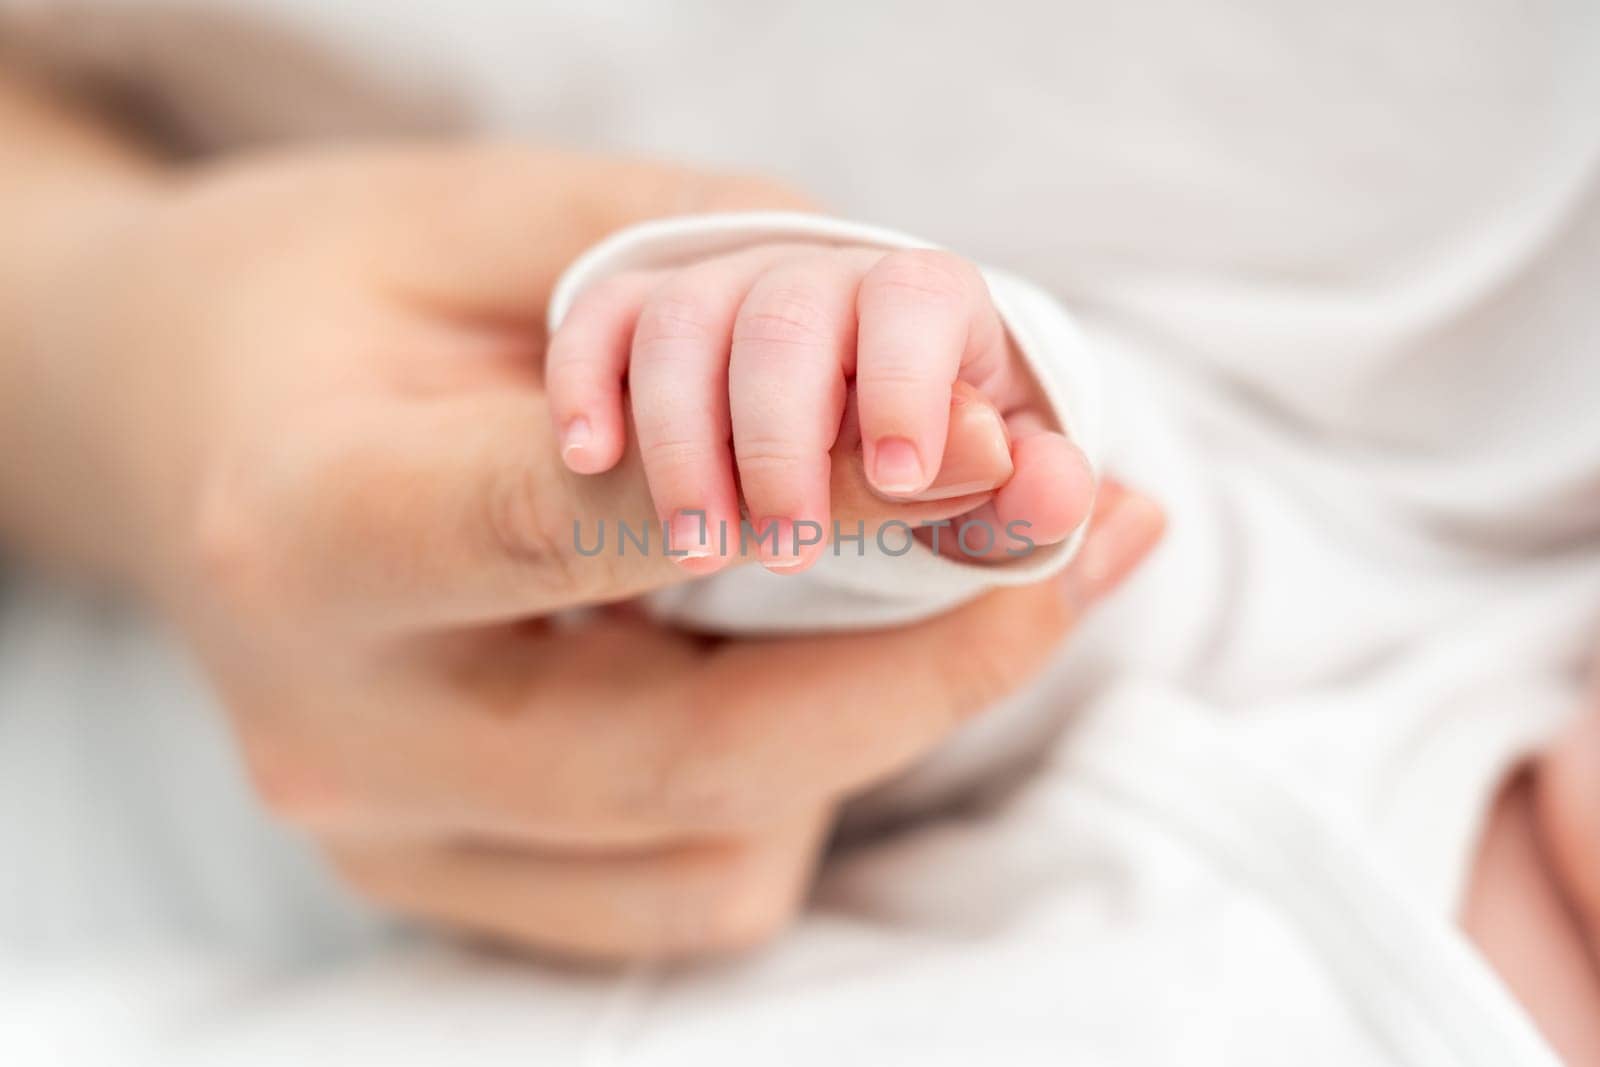 Newborn baby's gentle grasp on mother's finger evokes emotions. Concept of maternal bond and trust by Mariakray